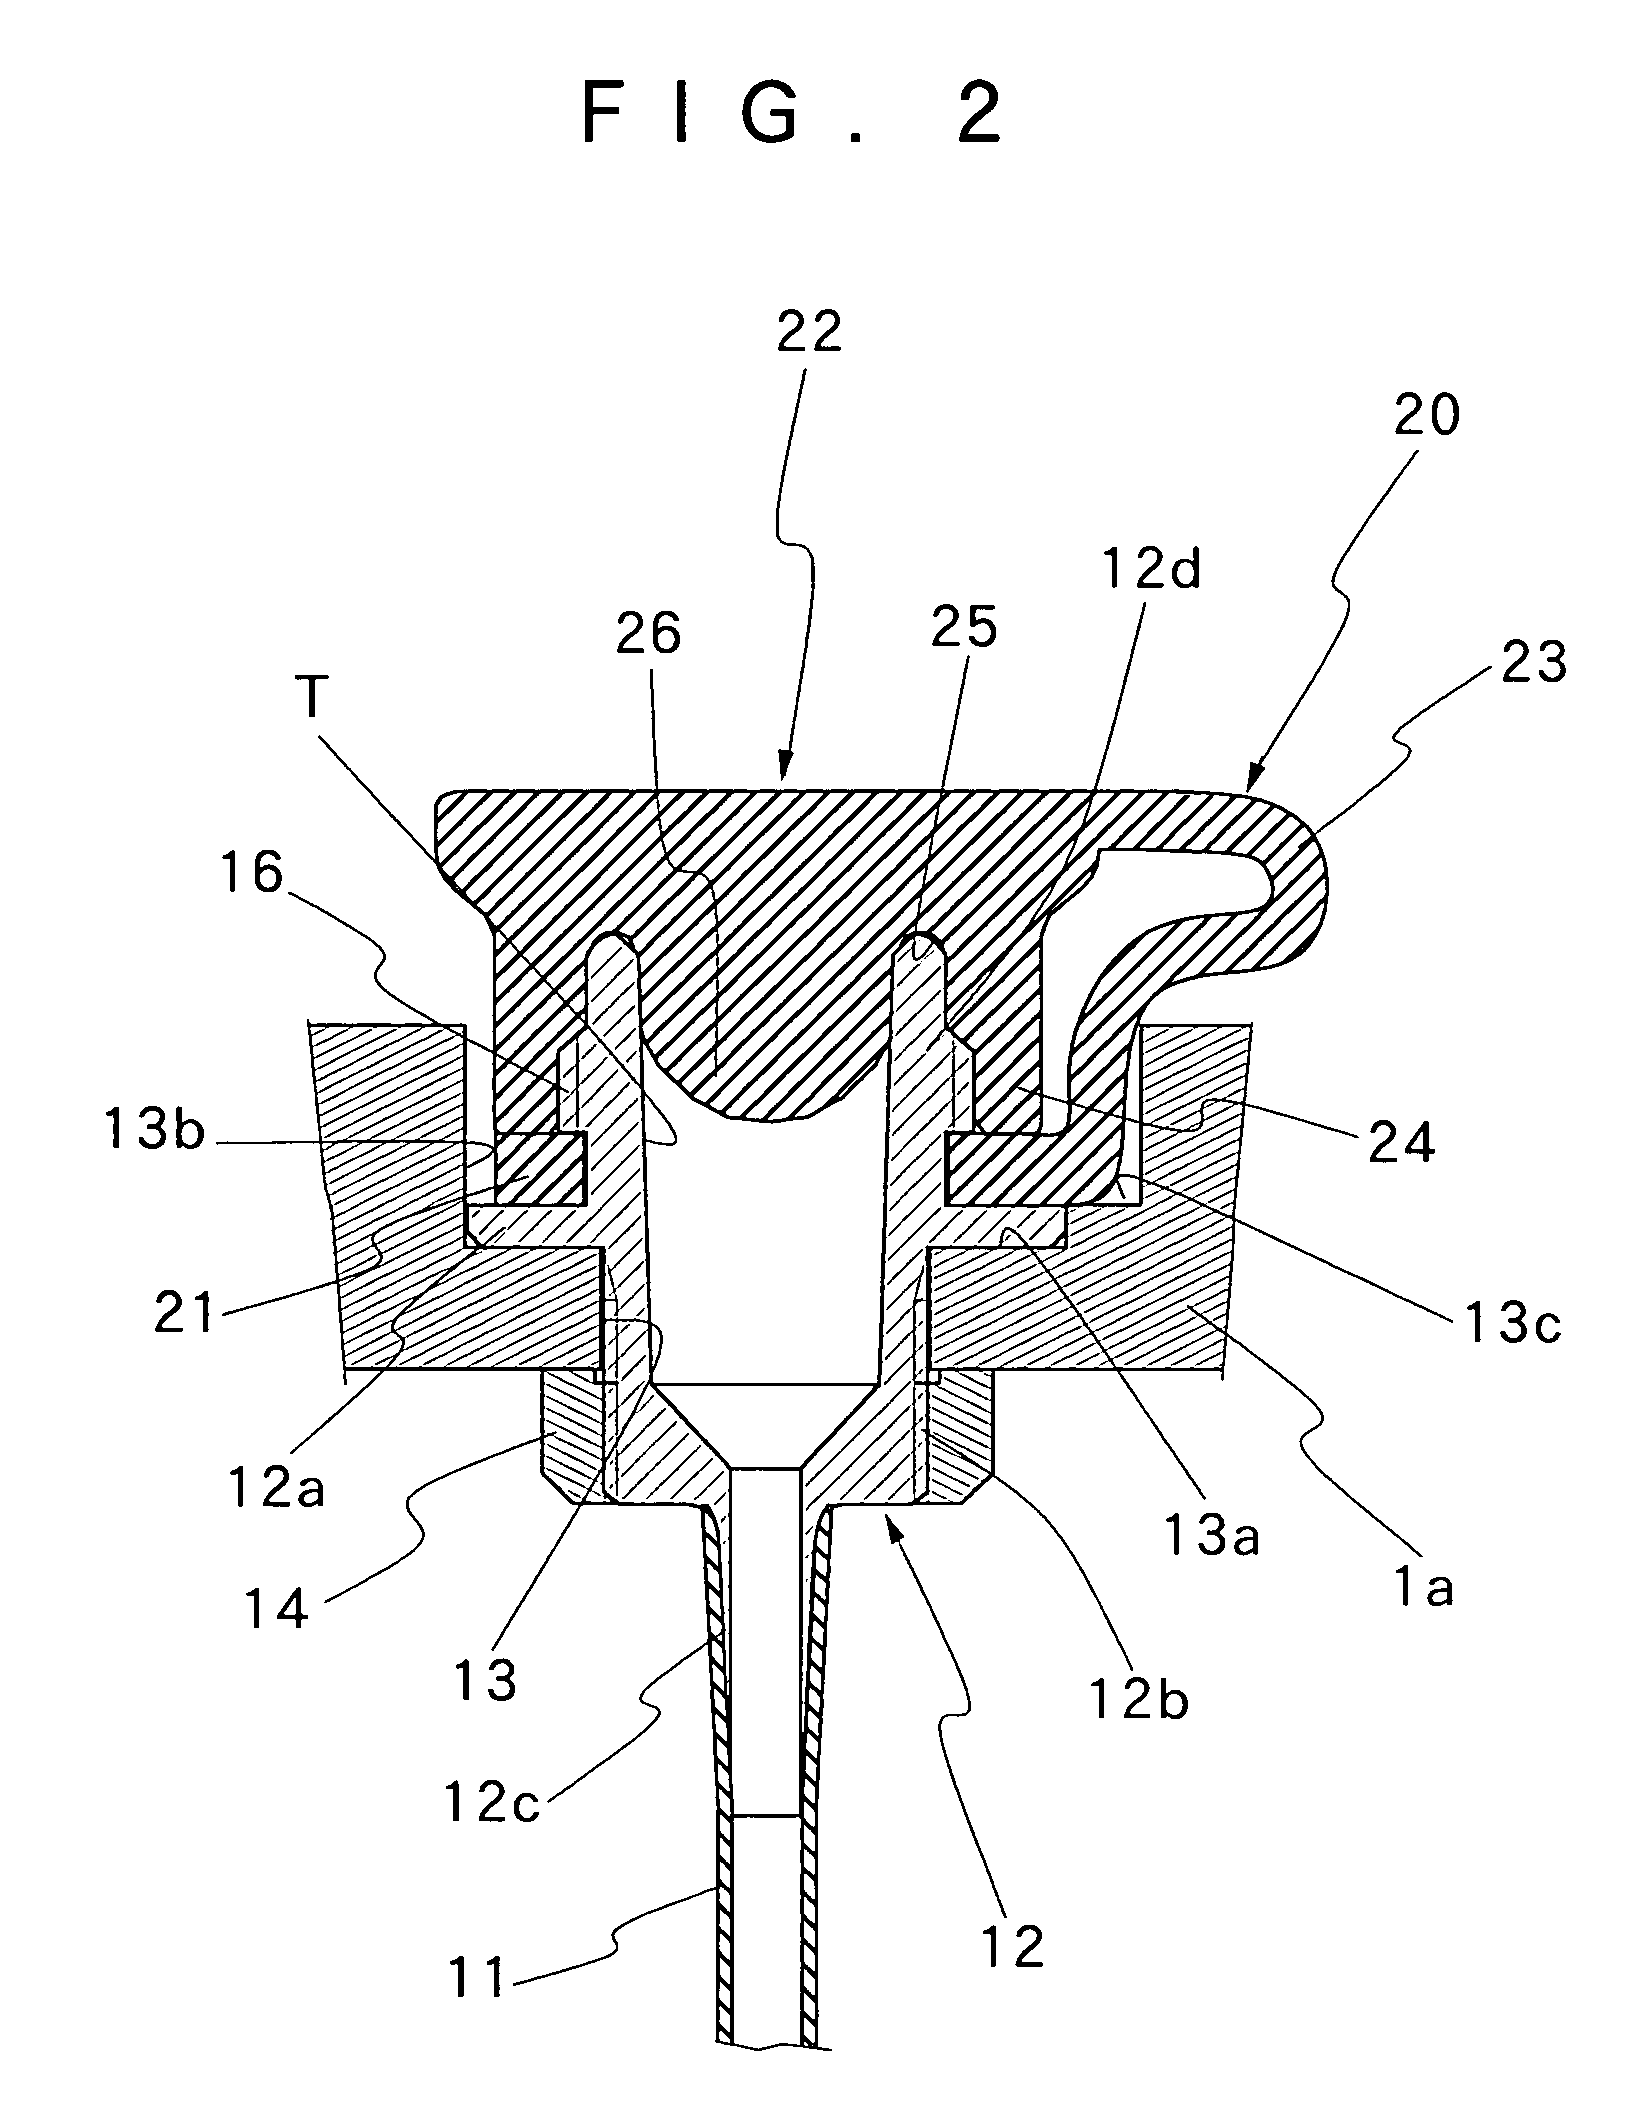 Liquid feed device for use on endoscopes